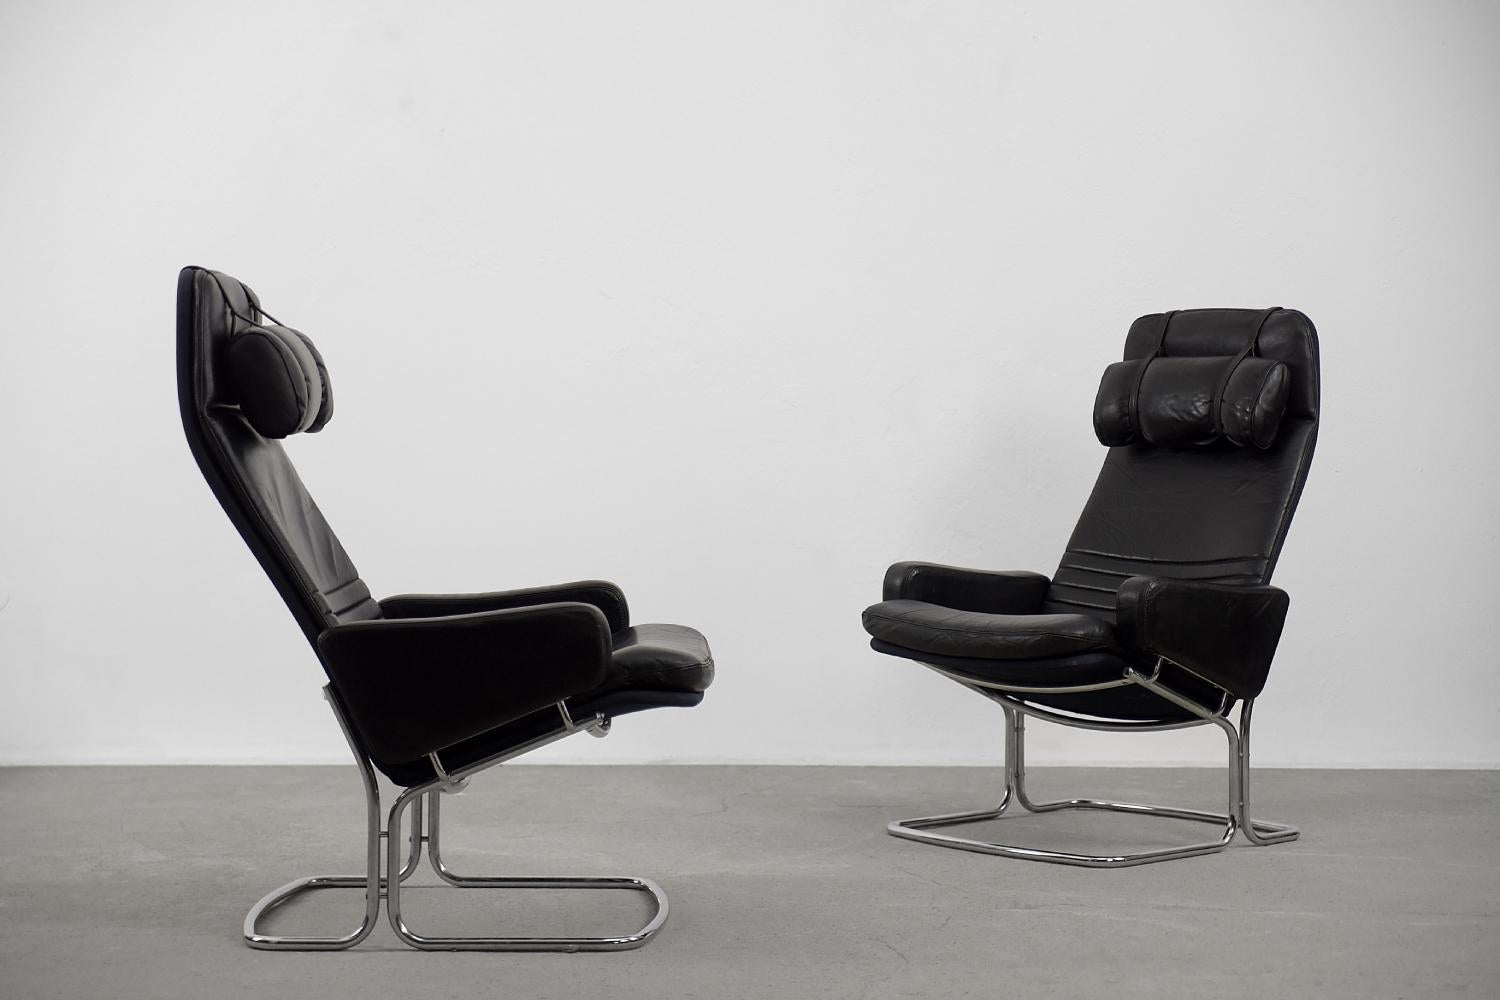 This set of rare armchairs was manufactured by Ire Möbel AB in Skillingaryd, Sweden, during the 1970s. The seats were upholstered in black natural leather with longitudinal stitching. They have a soft and comfortable seat and built-in armrests. The